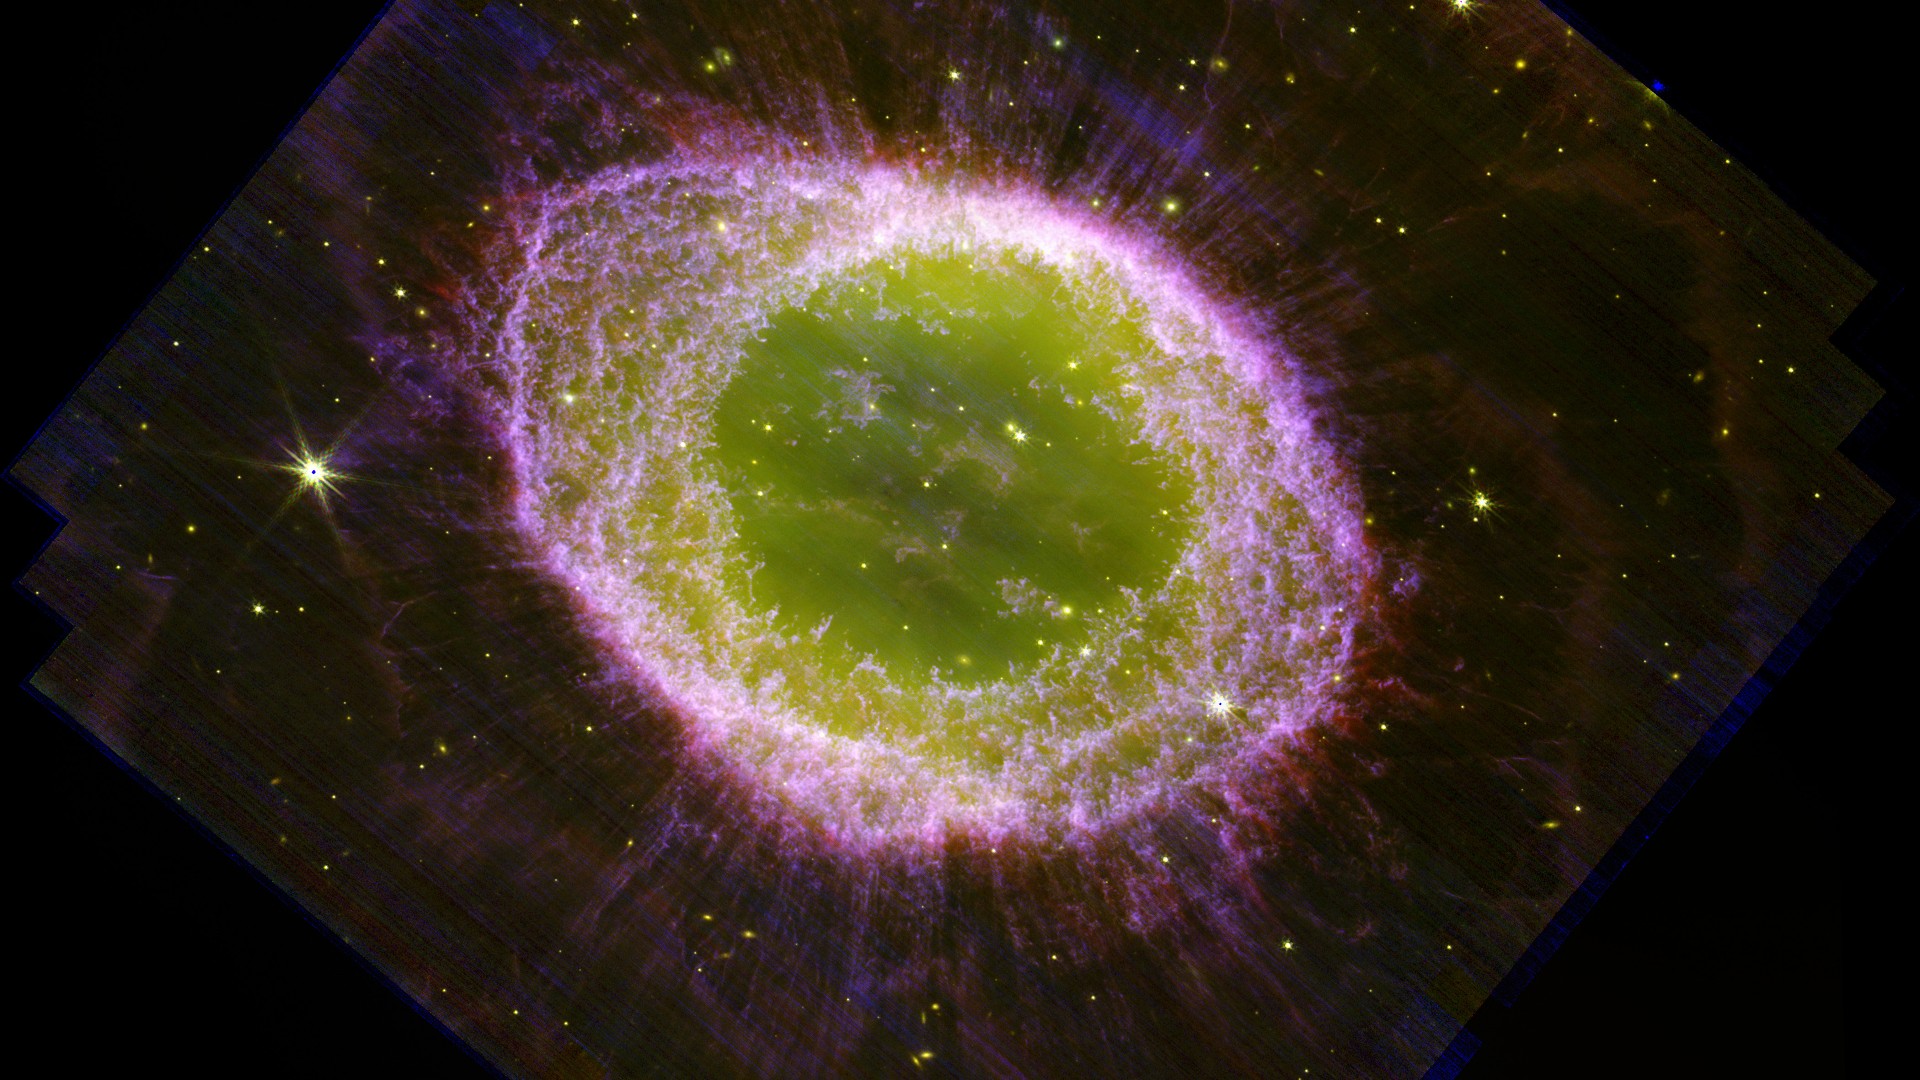 Imagine taken by the James Webb Space Telescope of the Ring Nebula (Messier 57). It looks like a glowing green eye surrounded by purple gas.